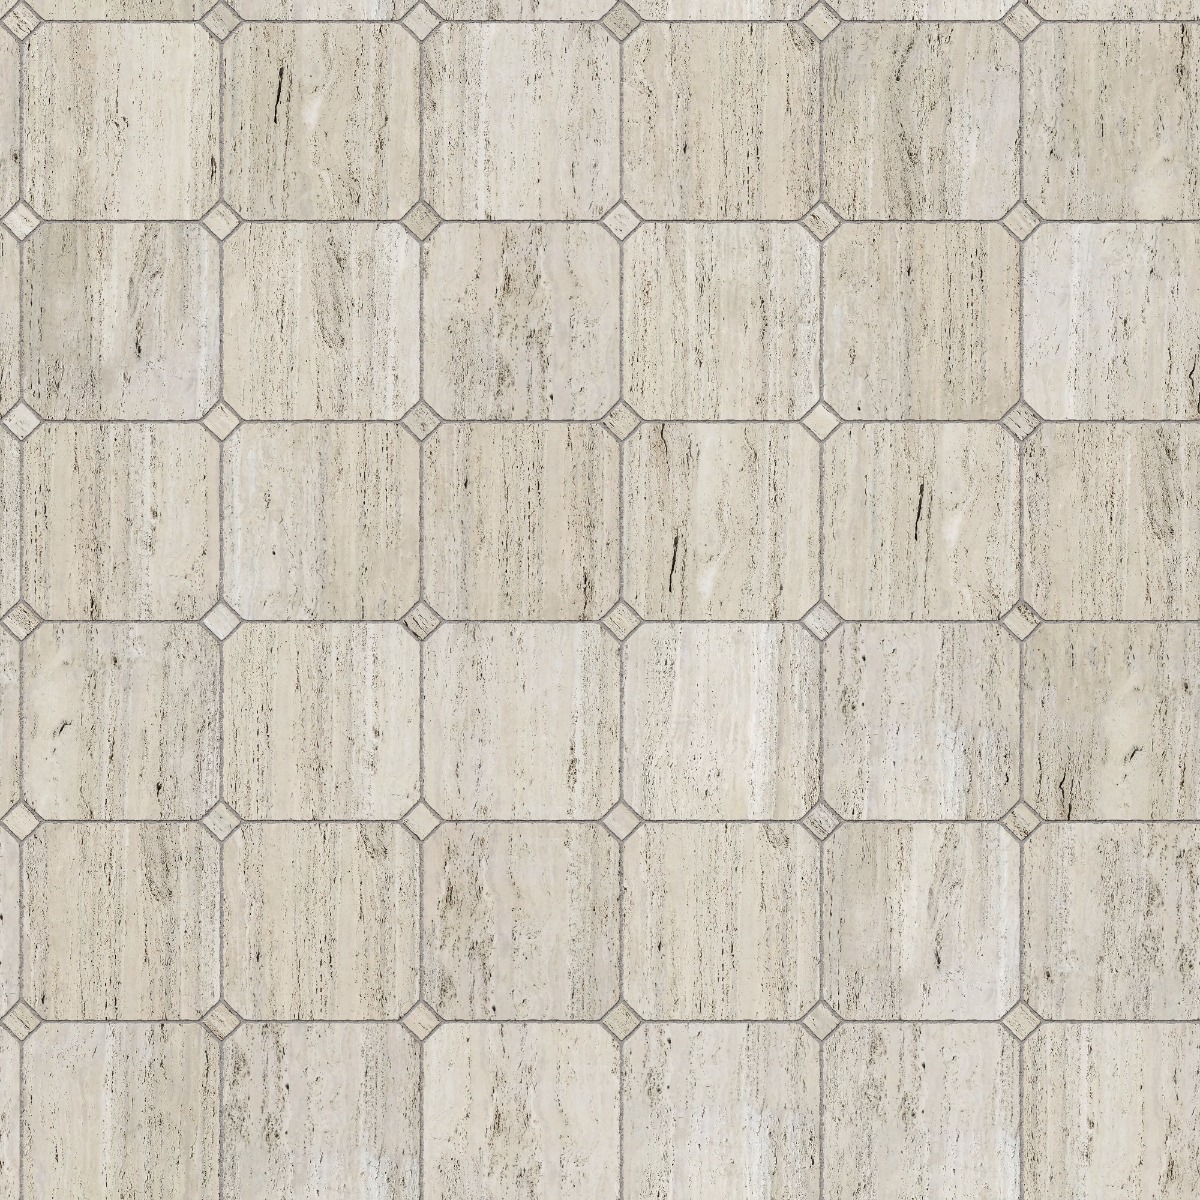 A seamless stone texture with travertine blocks arranged in a Octagon Square pattern